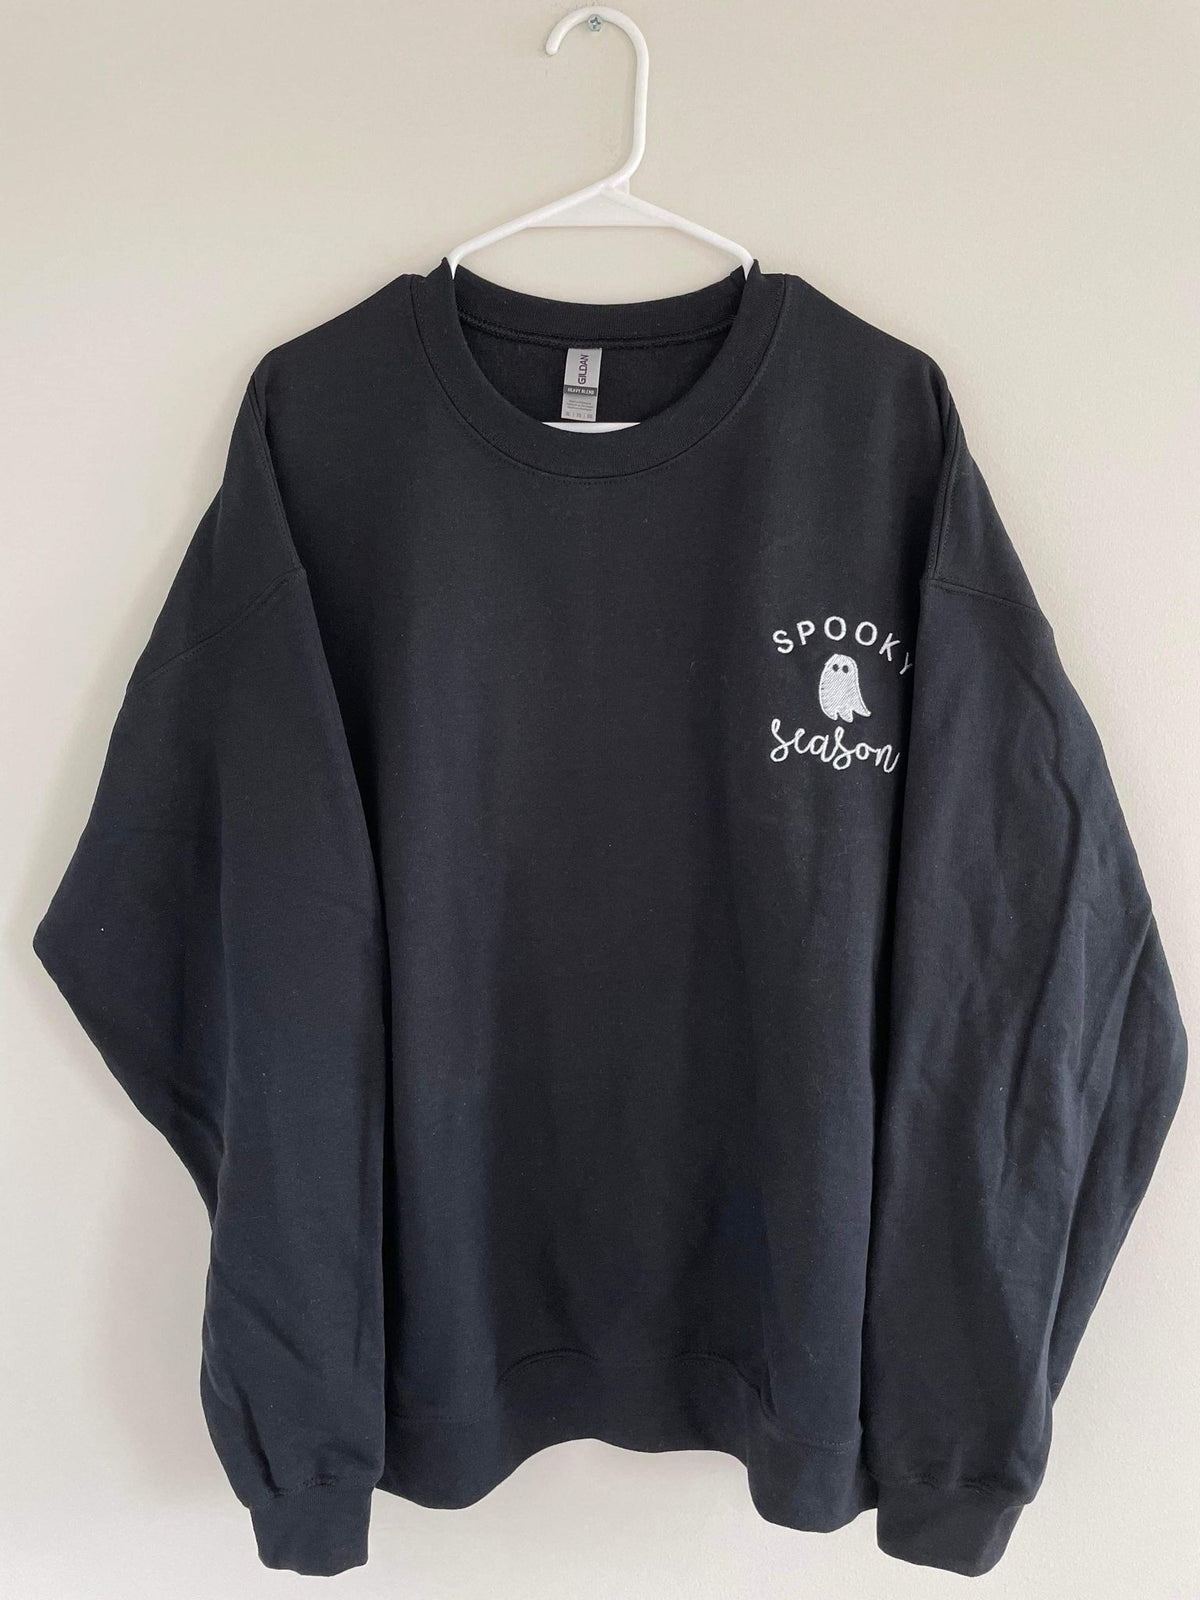 Spooky Season Embroidered Sweatshirt in Two Colors - RTS